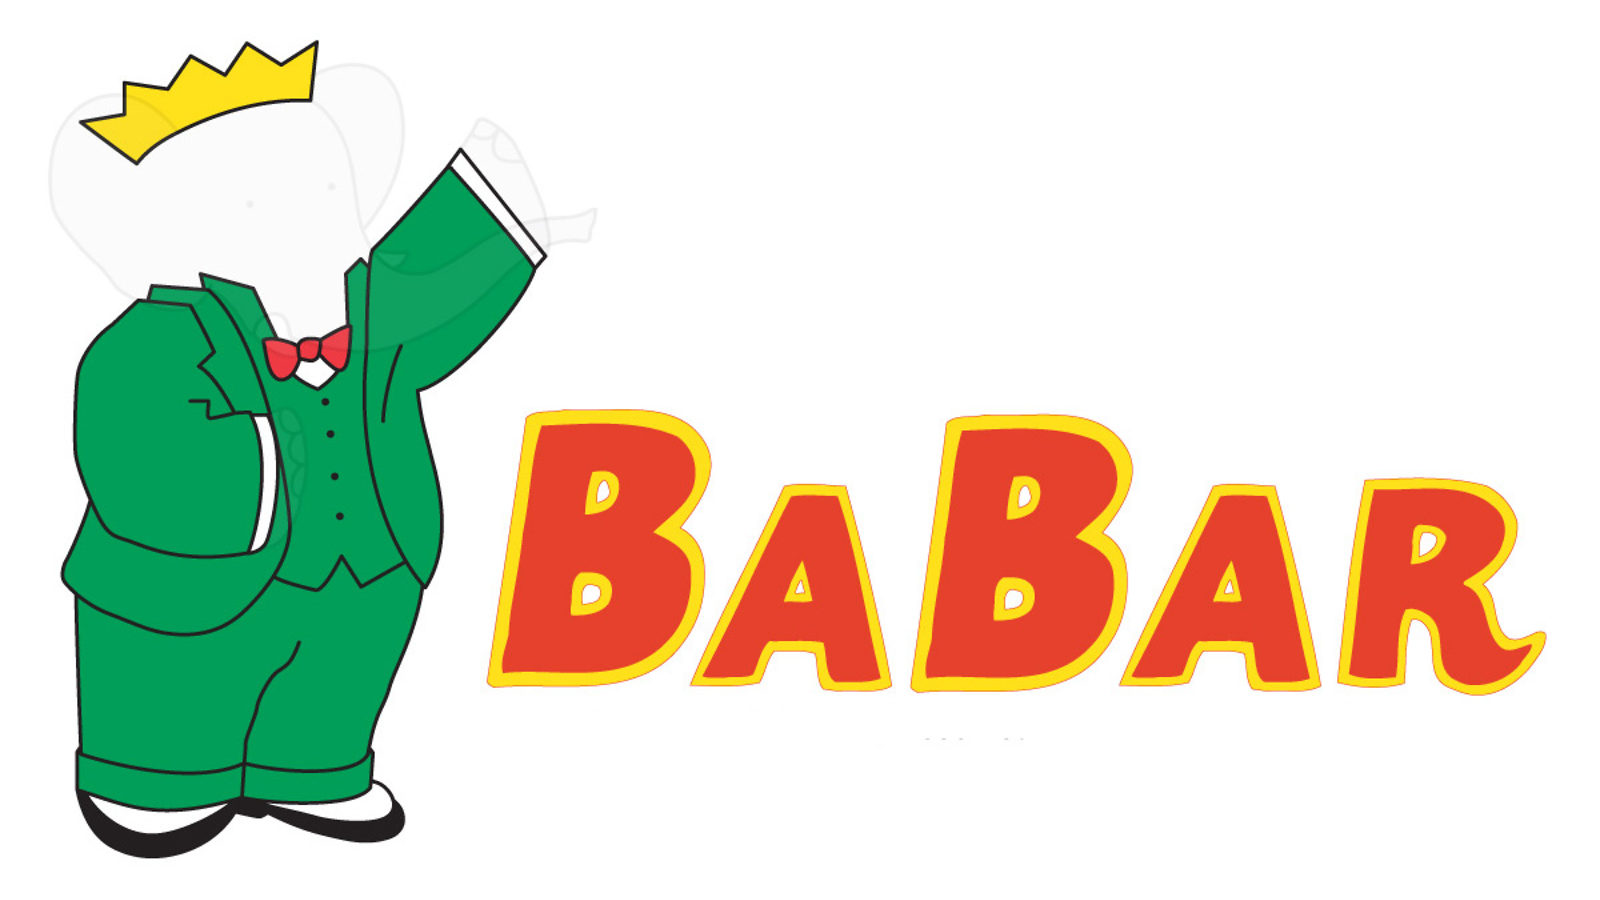 Illustration of BaBar invisible: green suite with invisible person inside "BaBar"